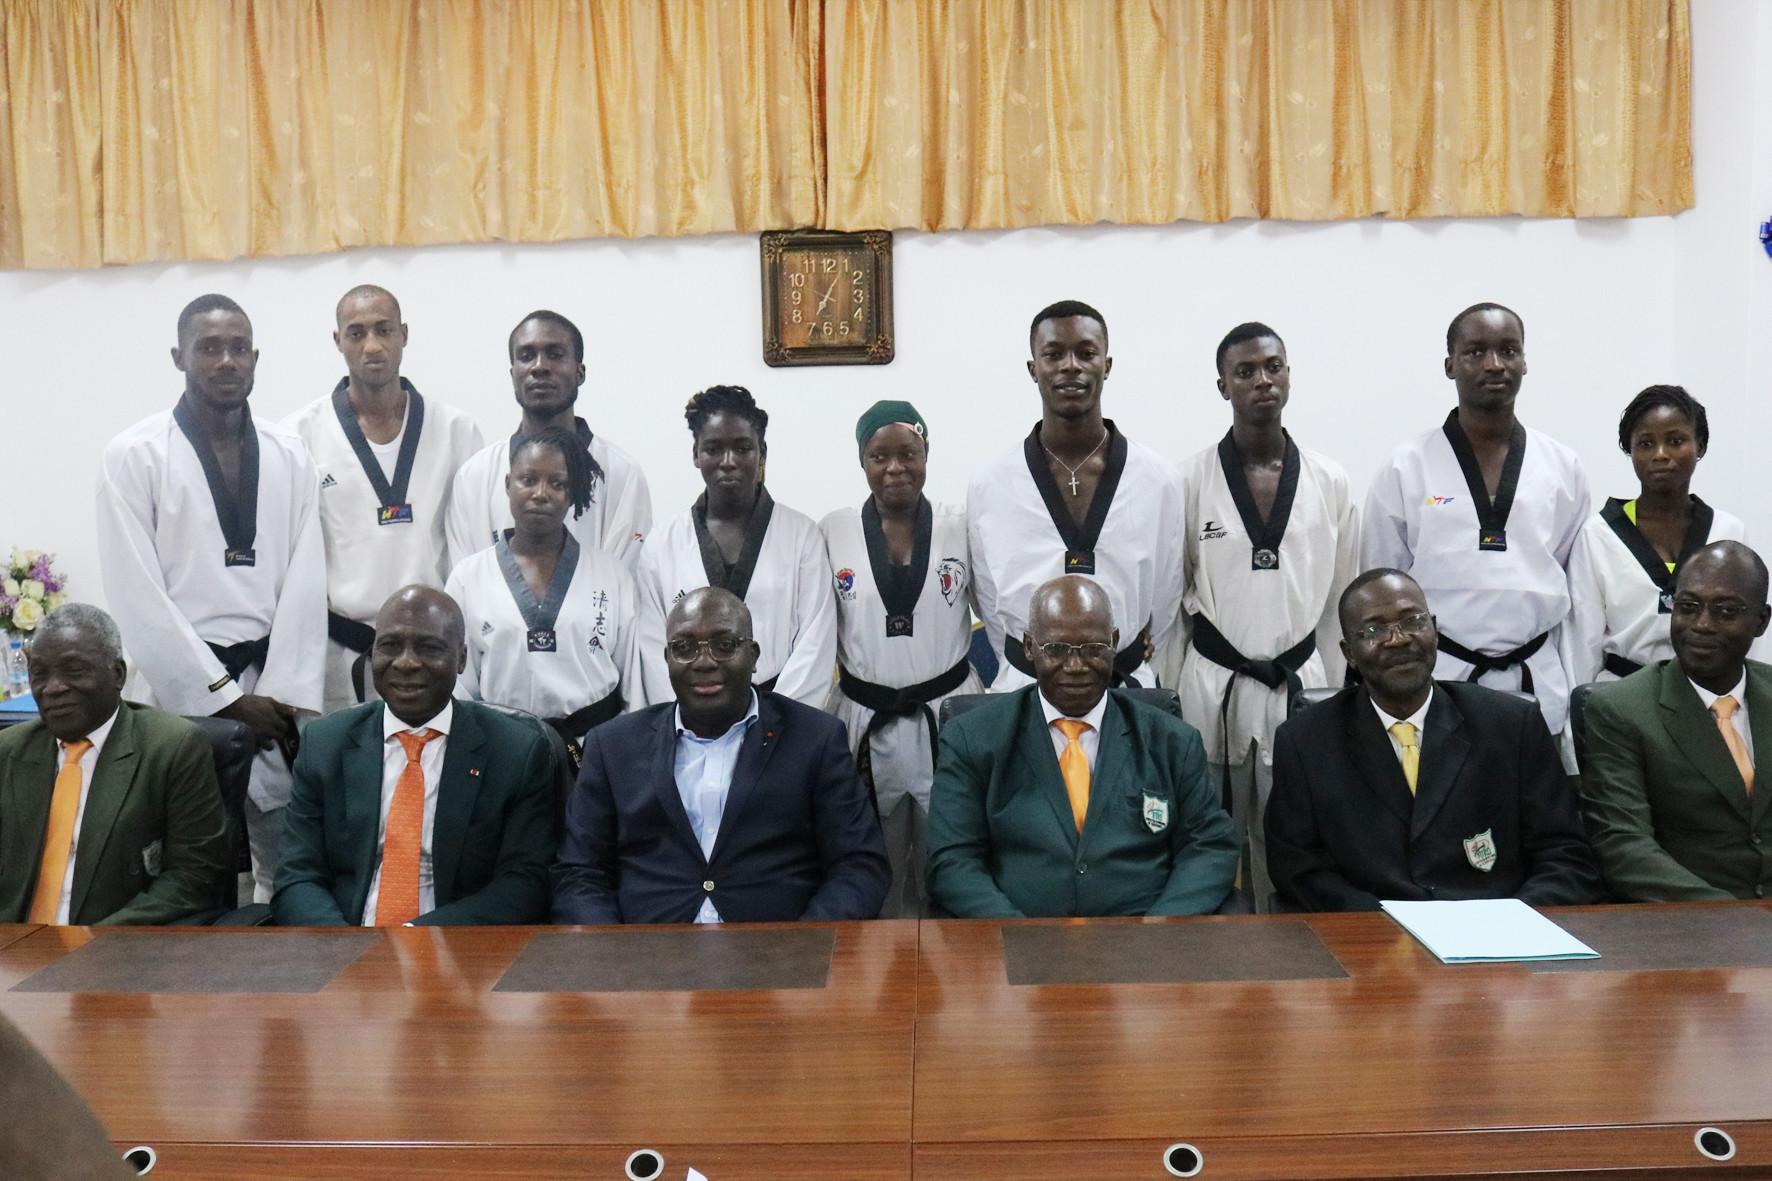 The Ivorian Taekwondo Federation has signed an agreement with the National Institute of Youth and Sports of Abidjan ©FITKD